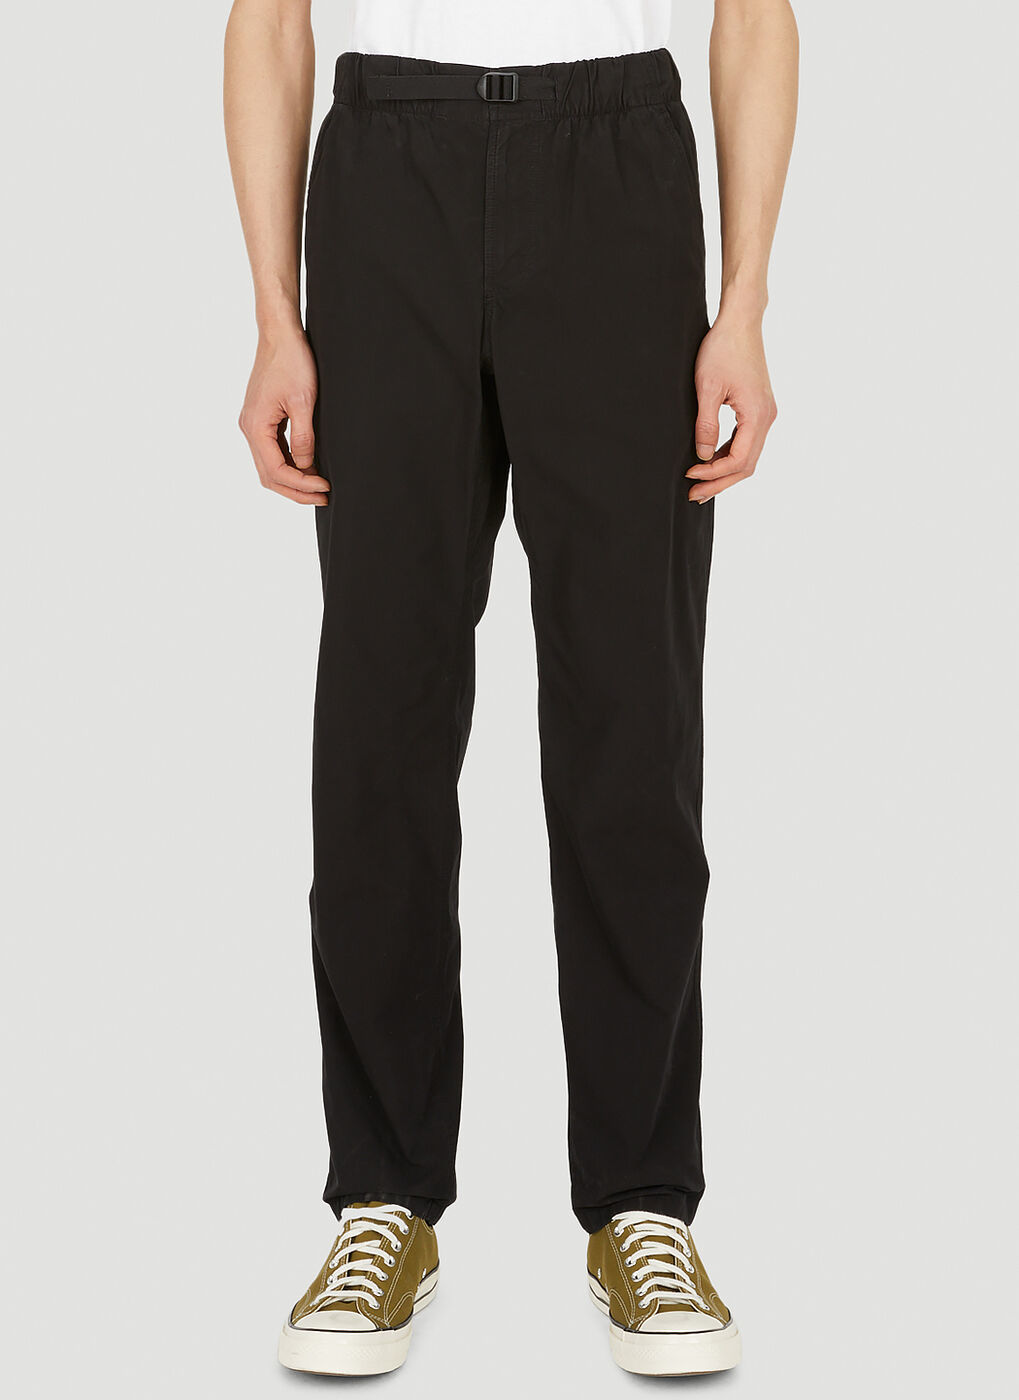 Youri Climber Pants in Black A.P.C.